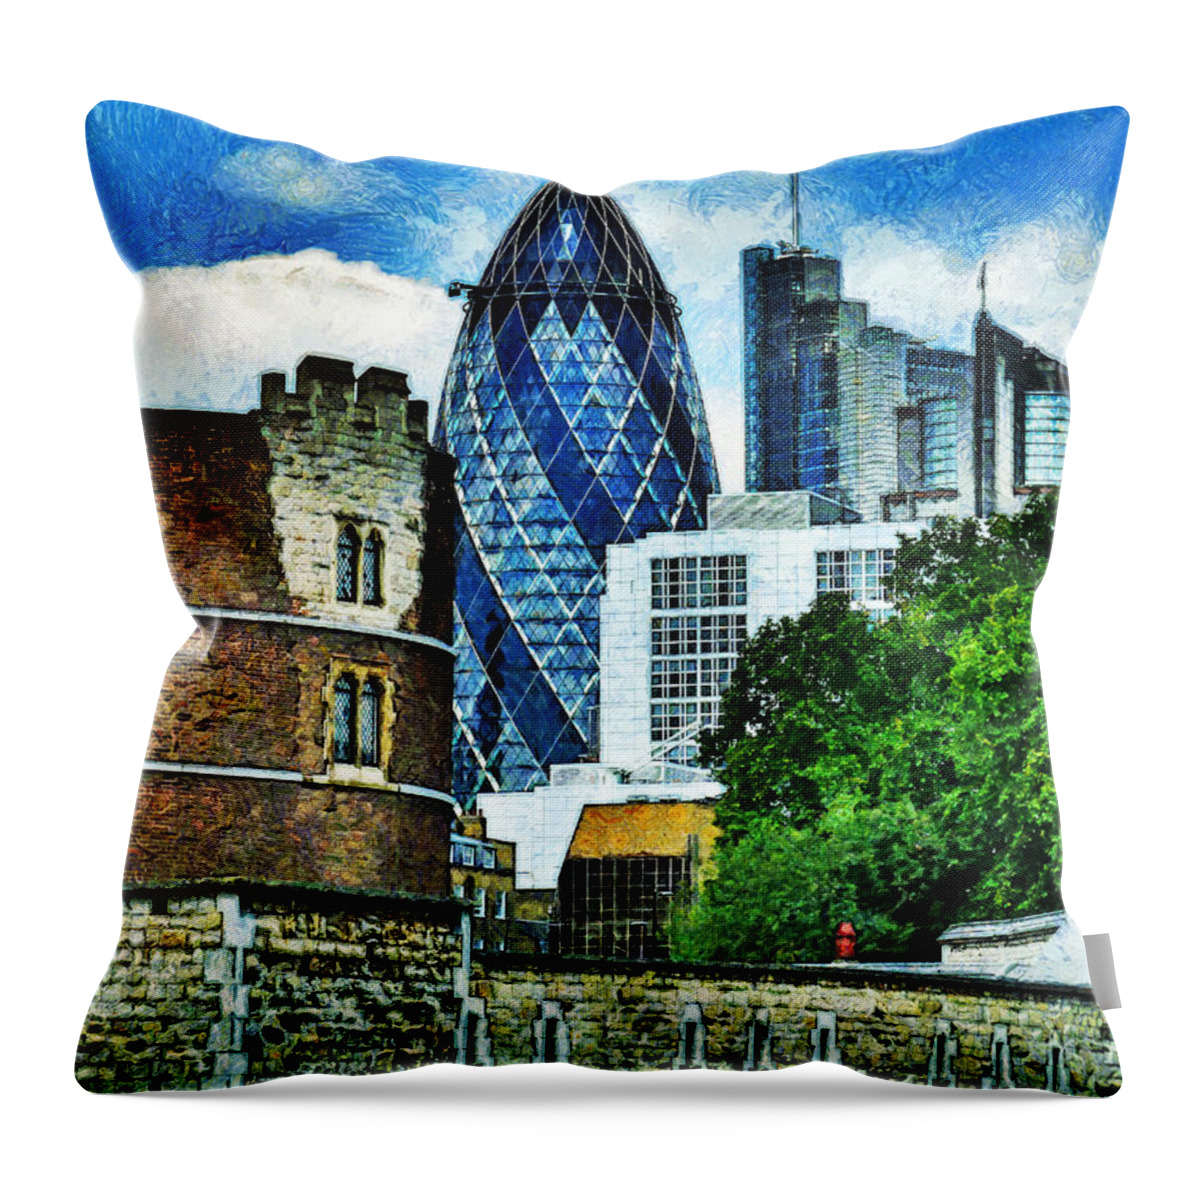 30 Throw Pillow featuring the photograph The London Gherkin by Steve Taylor